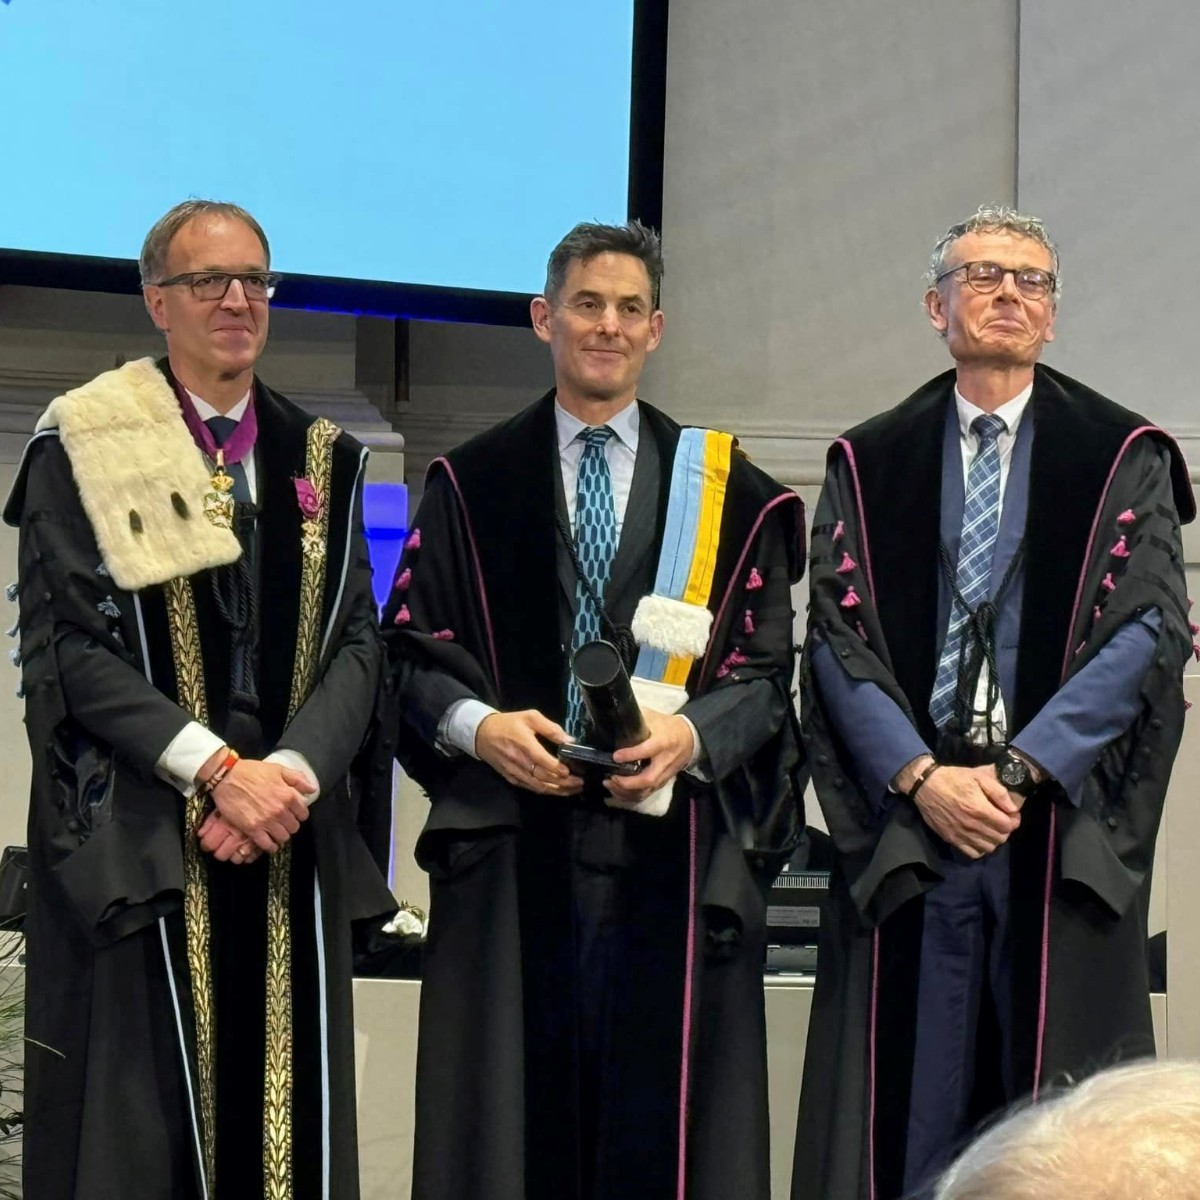 Professor Paul Hodges from #UQSHRS has been awarded an honorary doctorate from Ghent University in Belgium- making it his fourth. Find out more: brnw.ch/21wIFAm #UQ #Health @paulwhodges @ugent